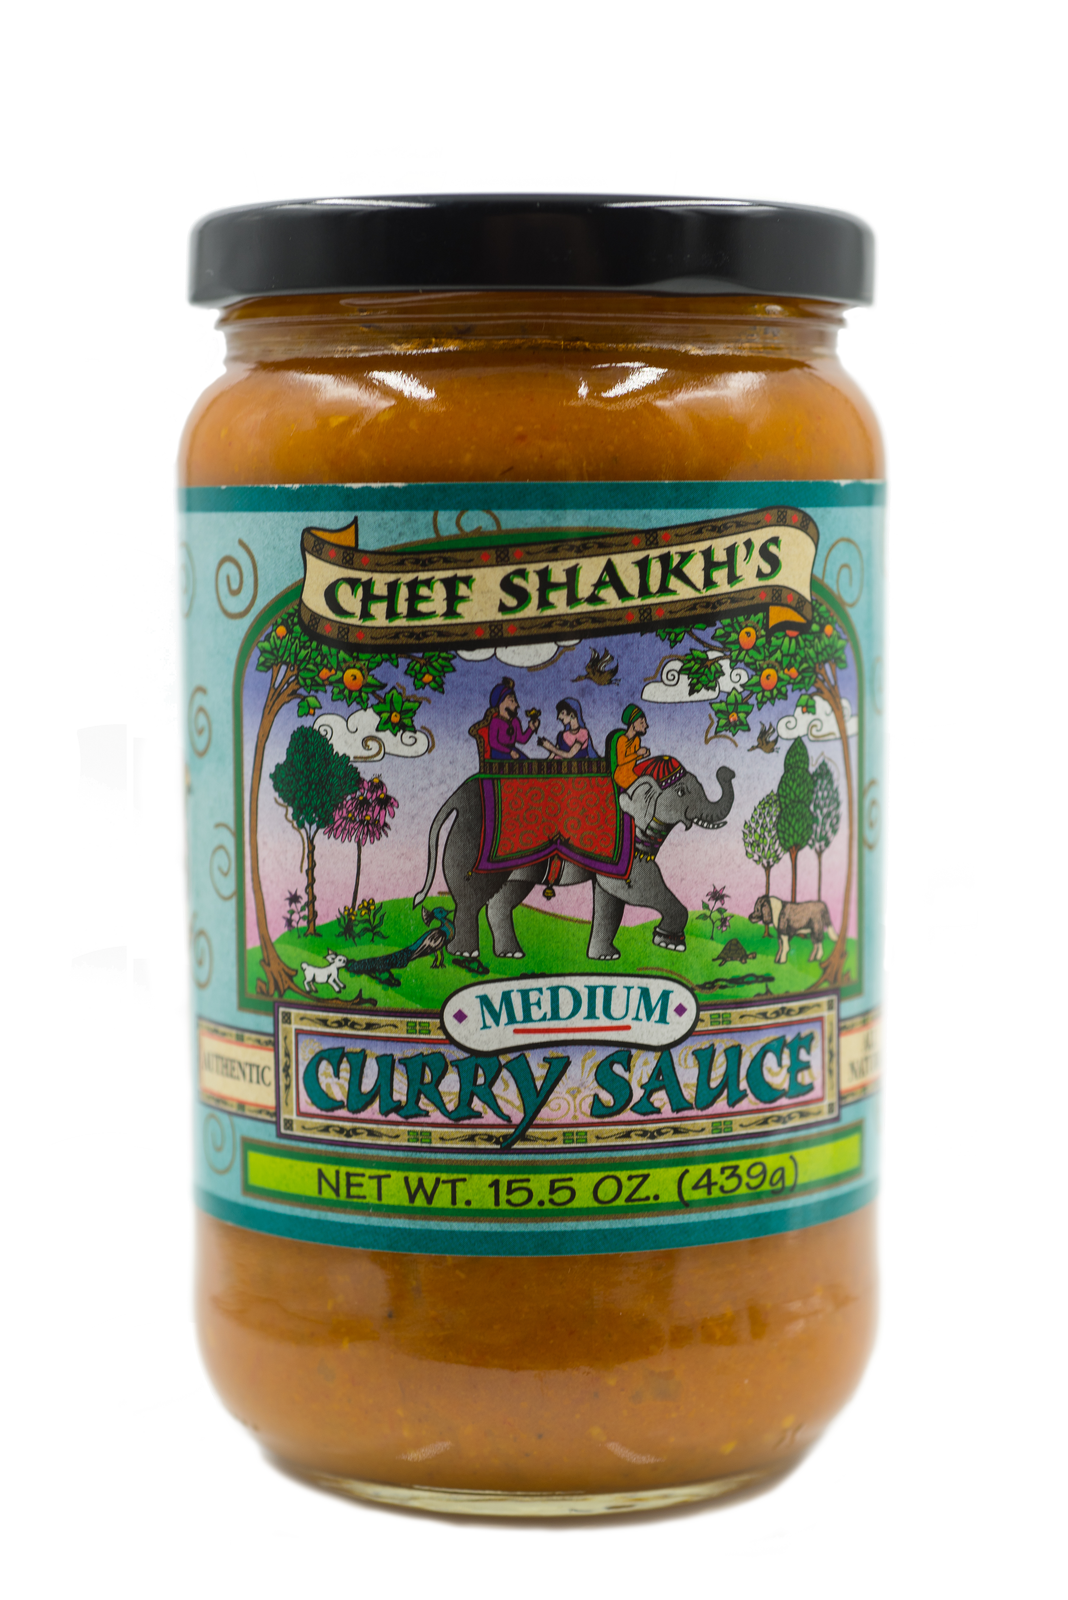 Chef Shaikh's Curry Sauce Medium, Speciality Foods Co-Packing Example | Palace Foods Inc.